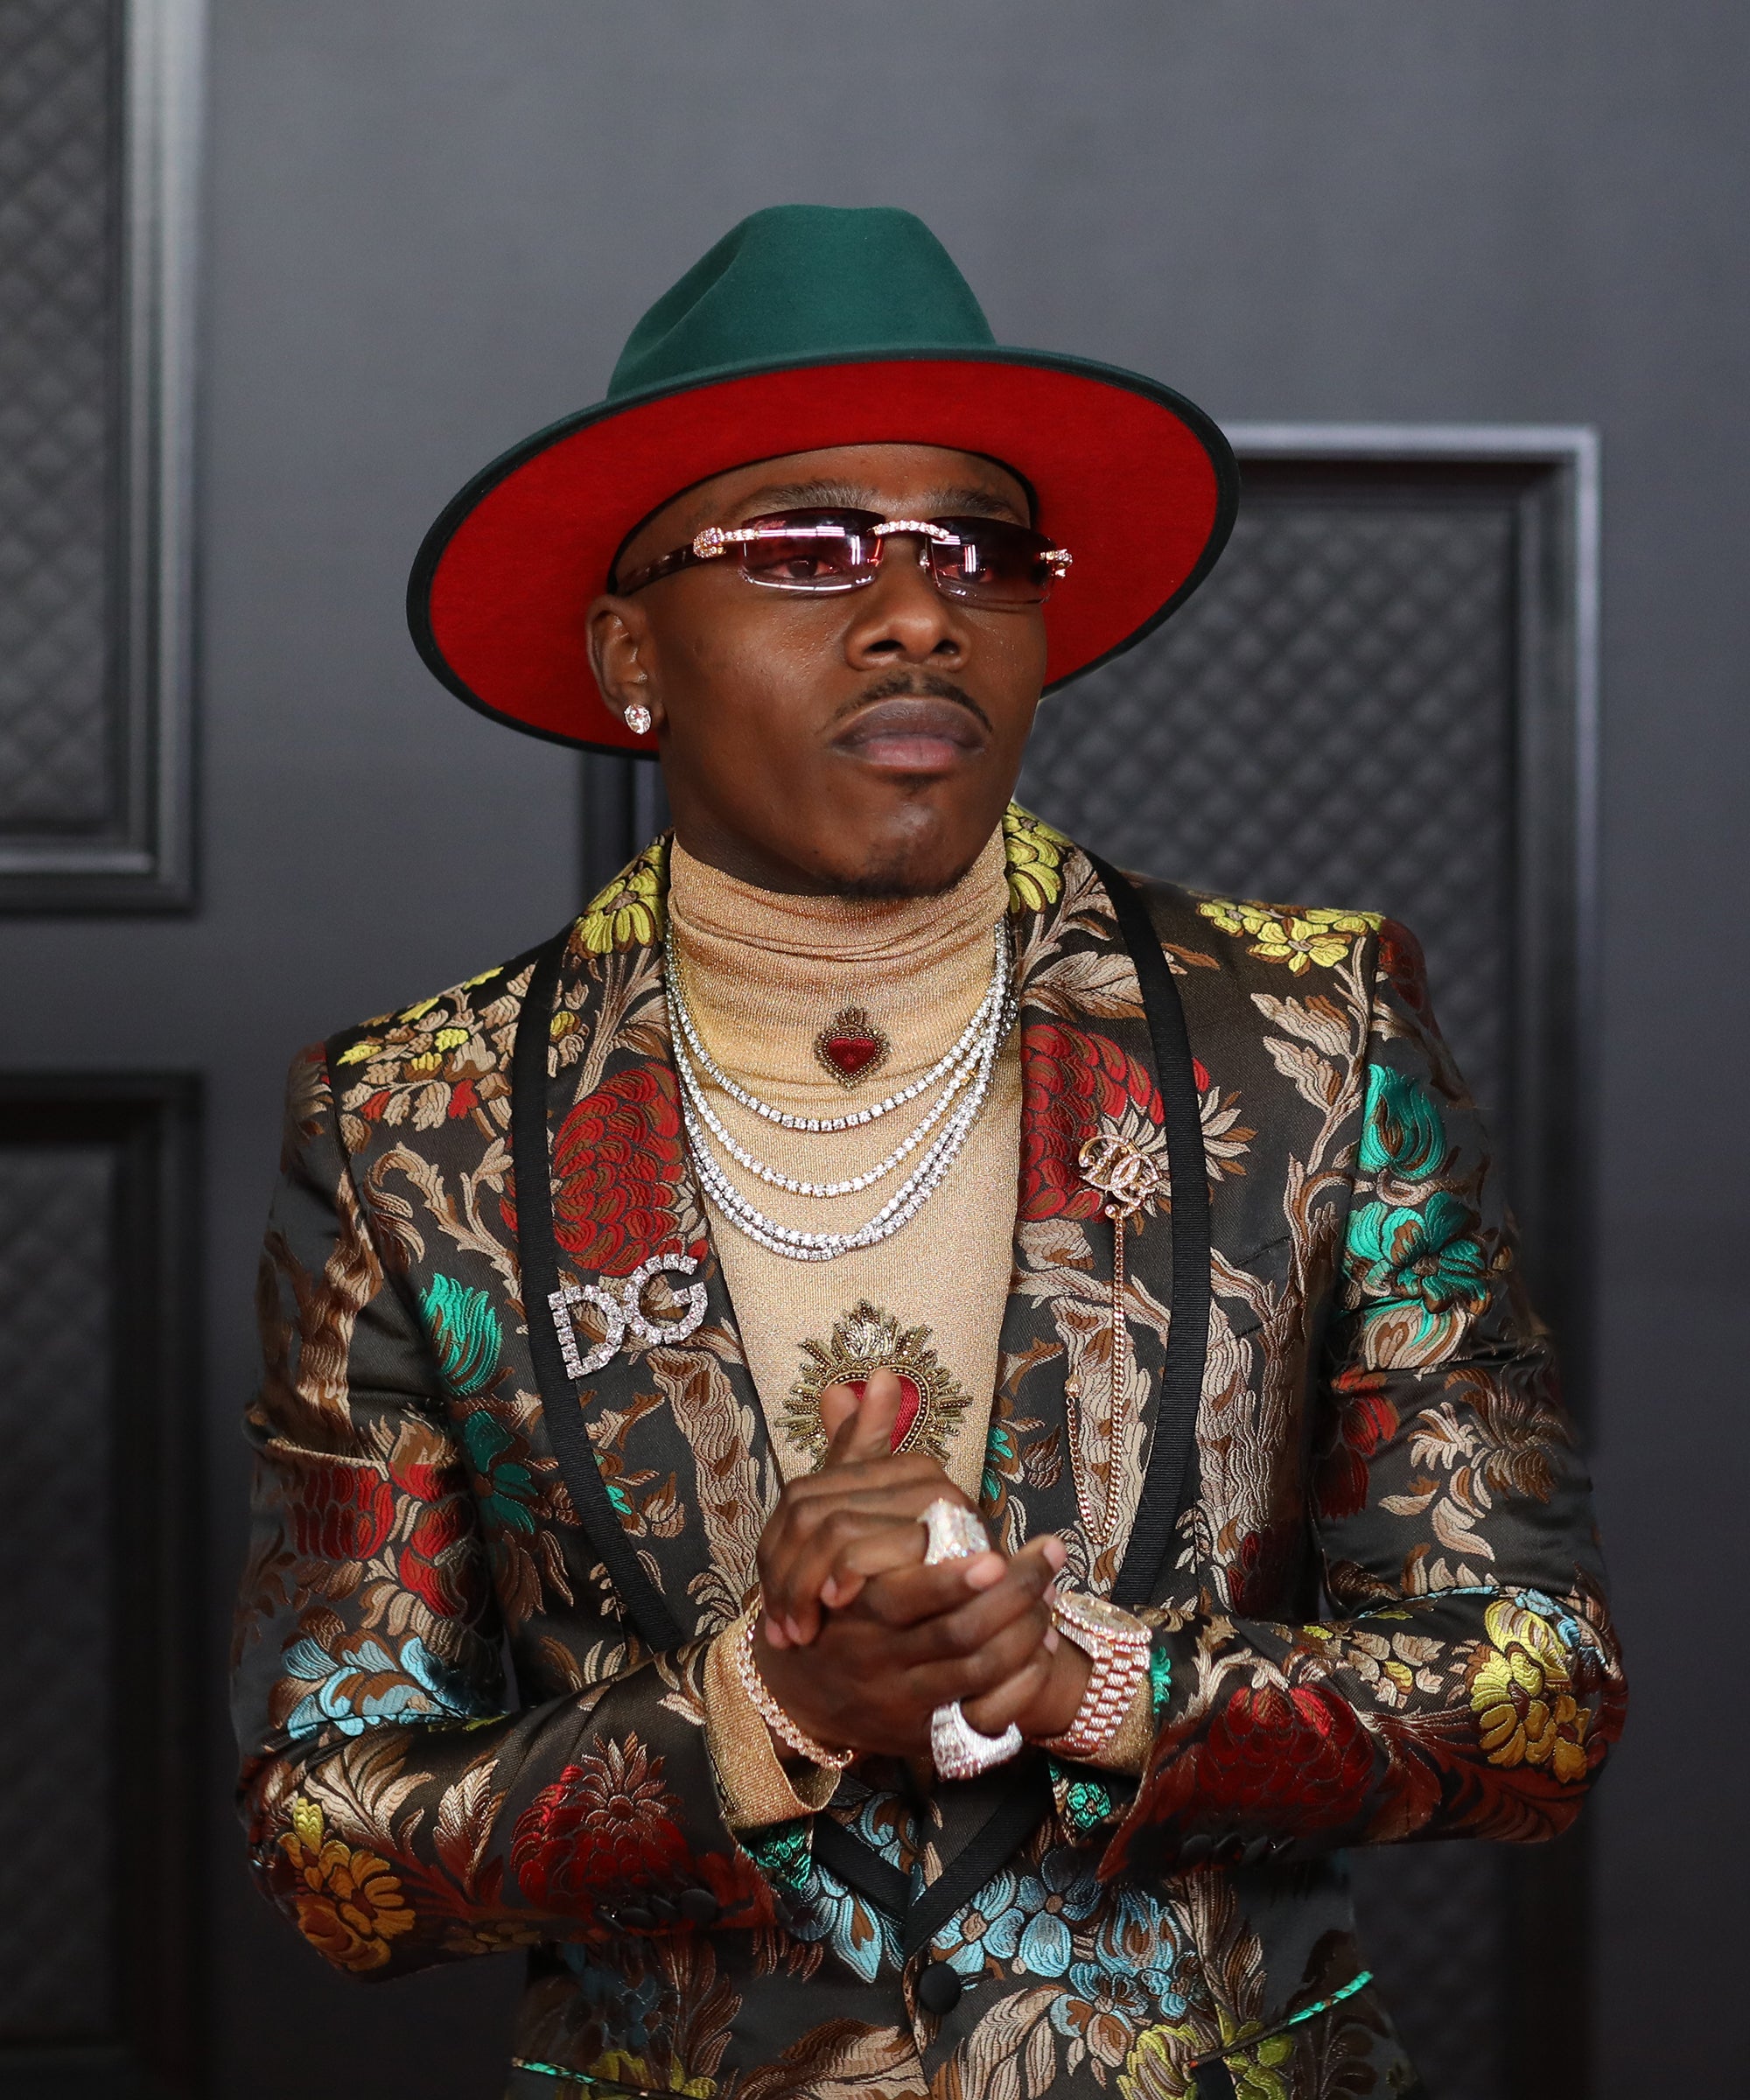 DaBaby defends homophobic comments amid backlash